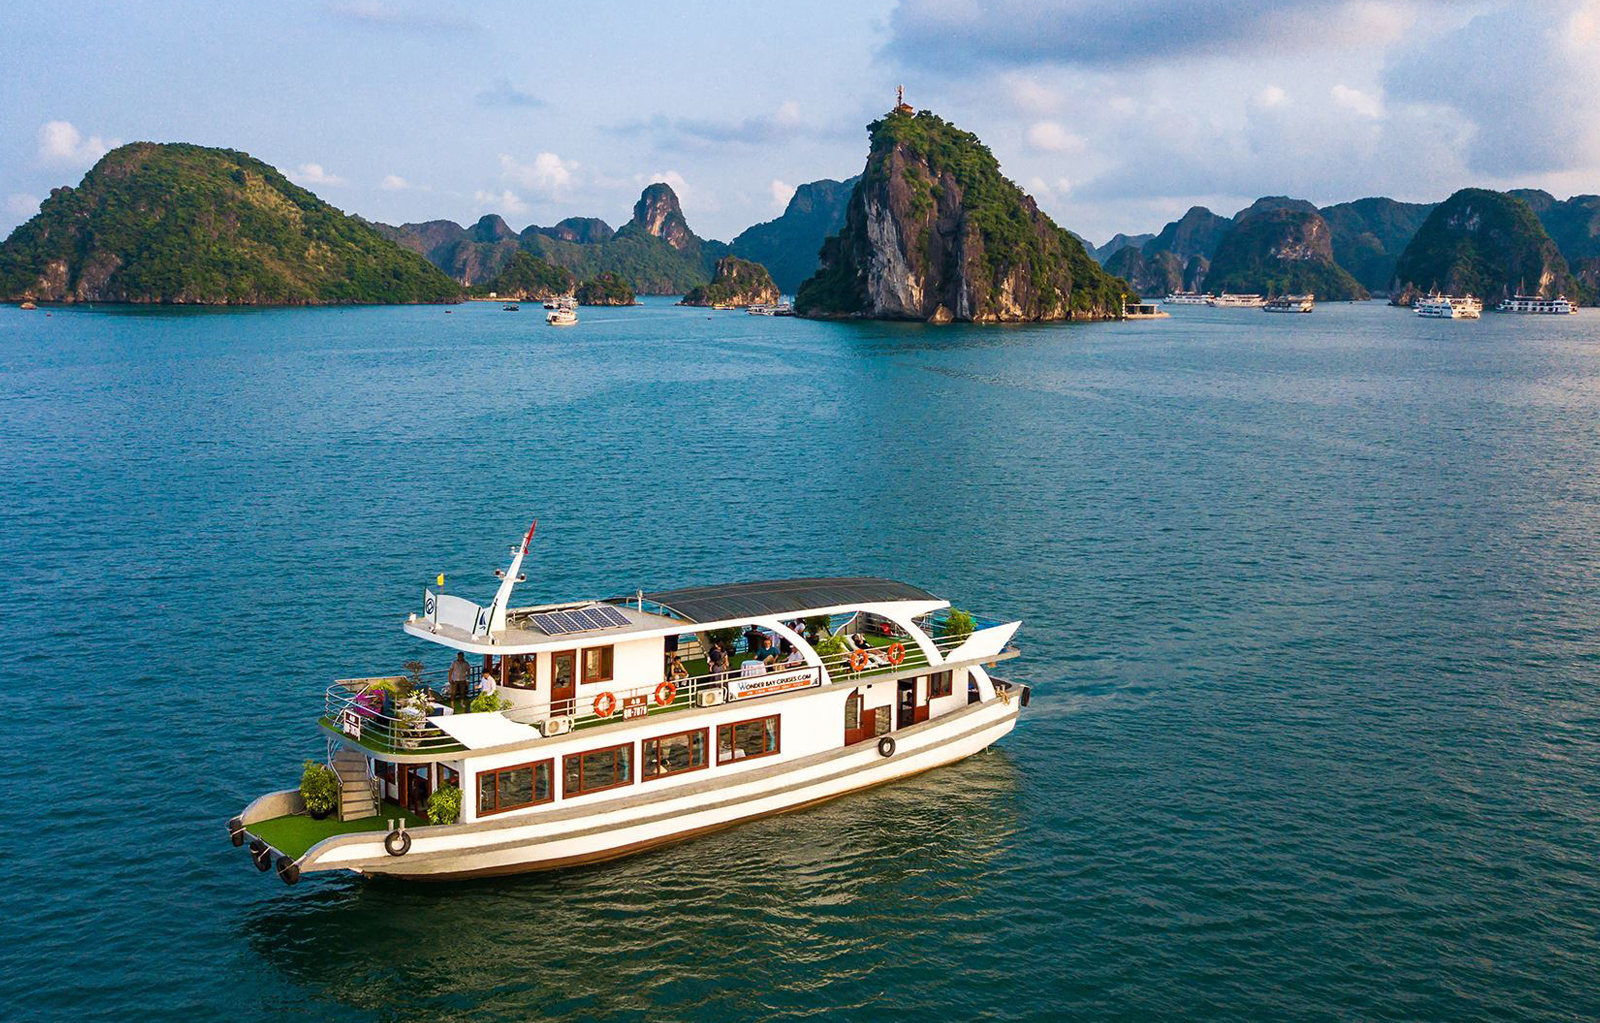 HA LONG BAY - 1 day tour with Wonderbay cruise